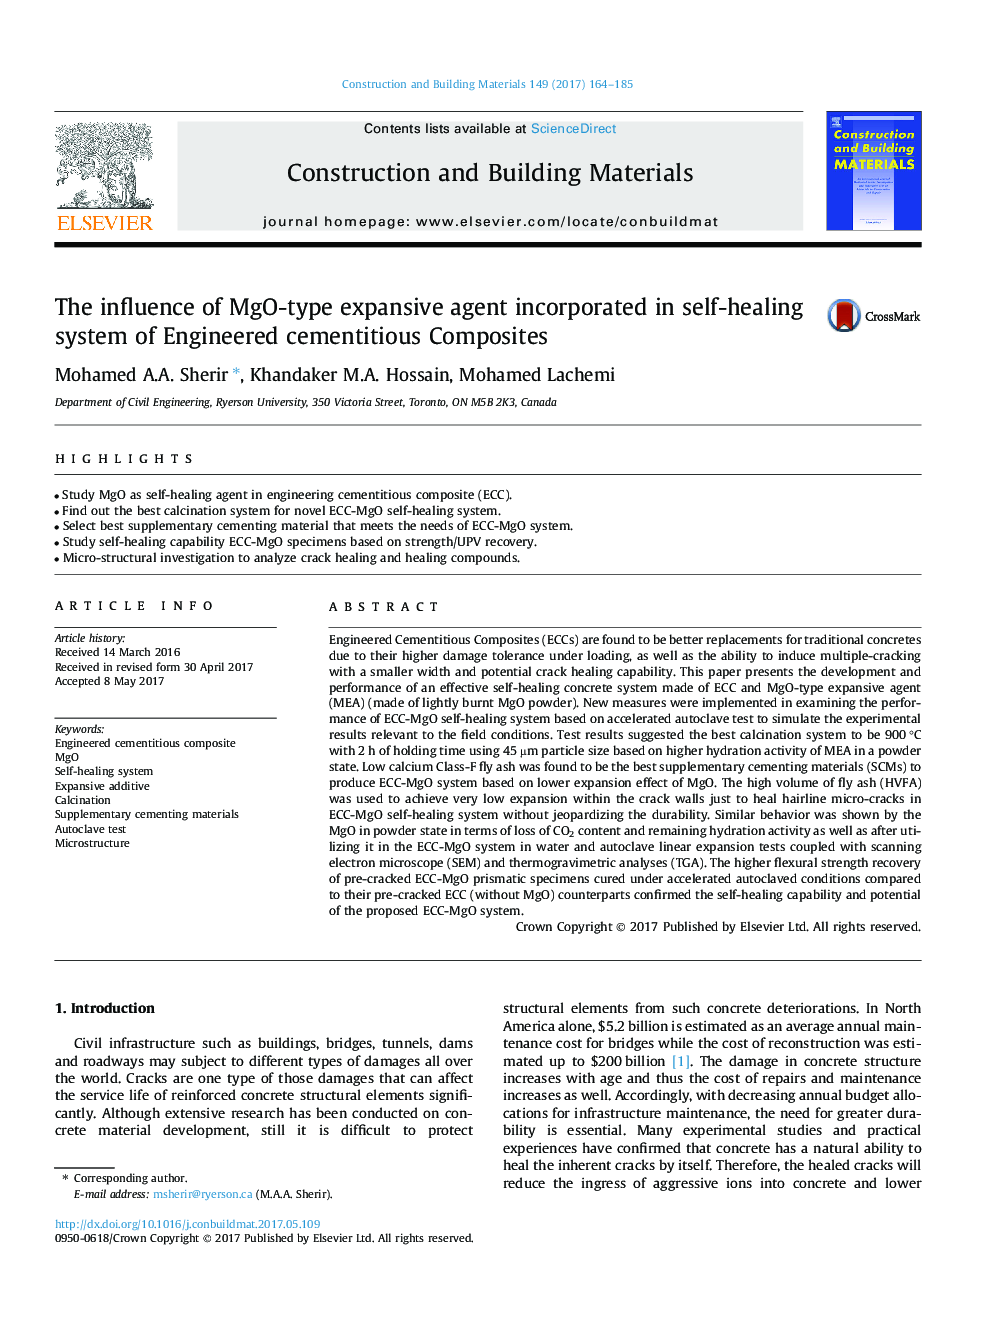 The influence of MgO-type expansive agent incorporated in self-healing system of Engineered cementitious Composites